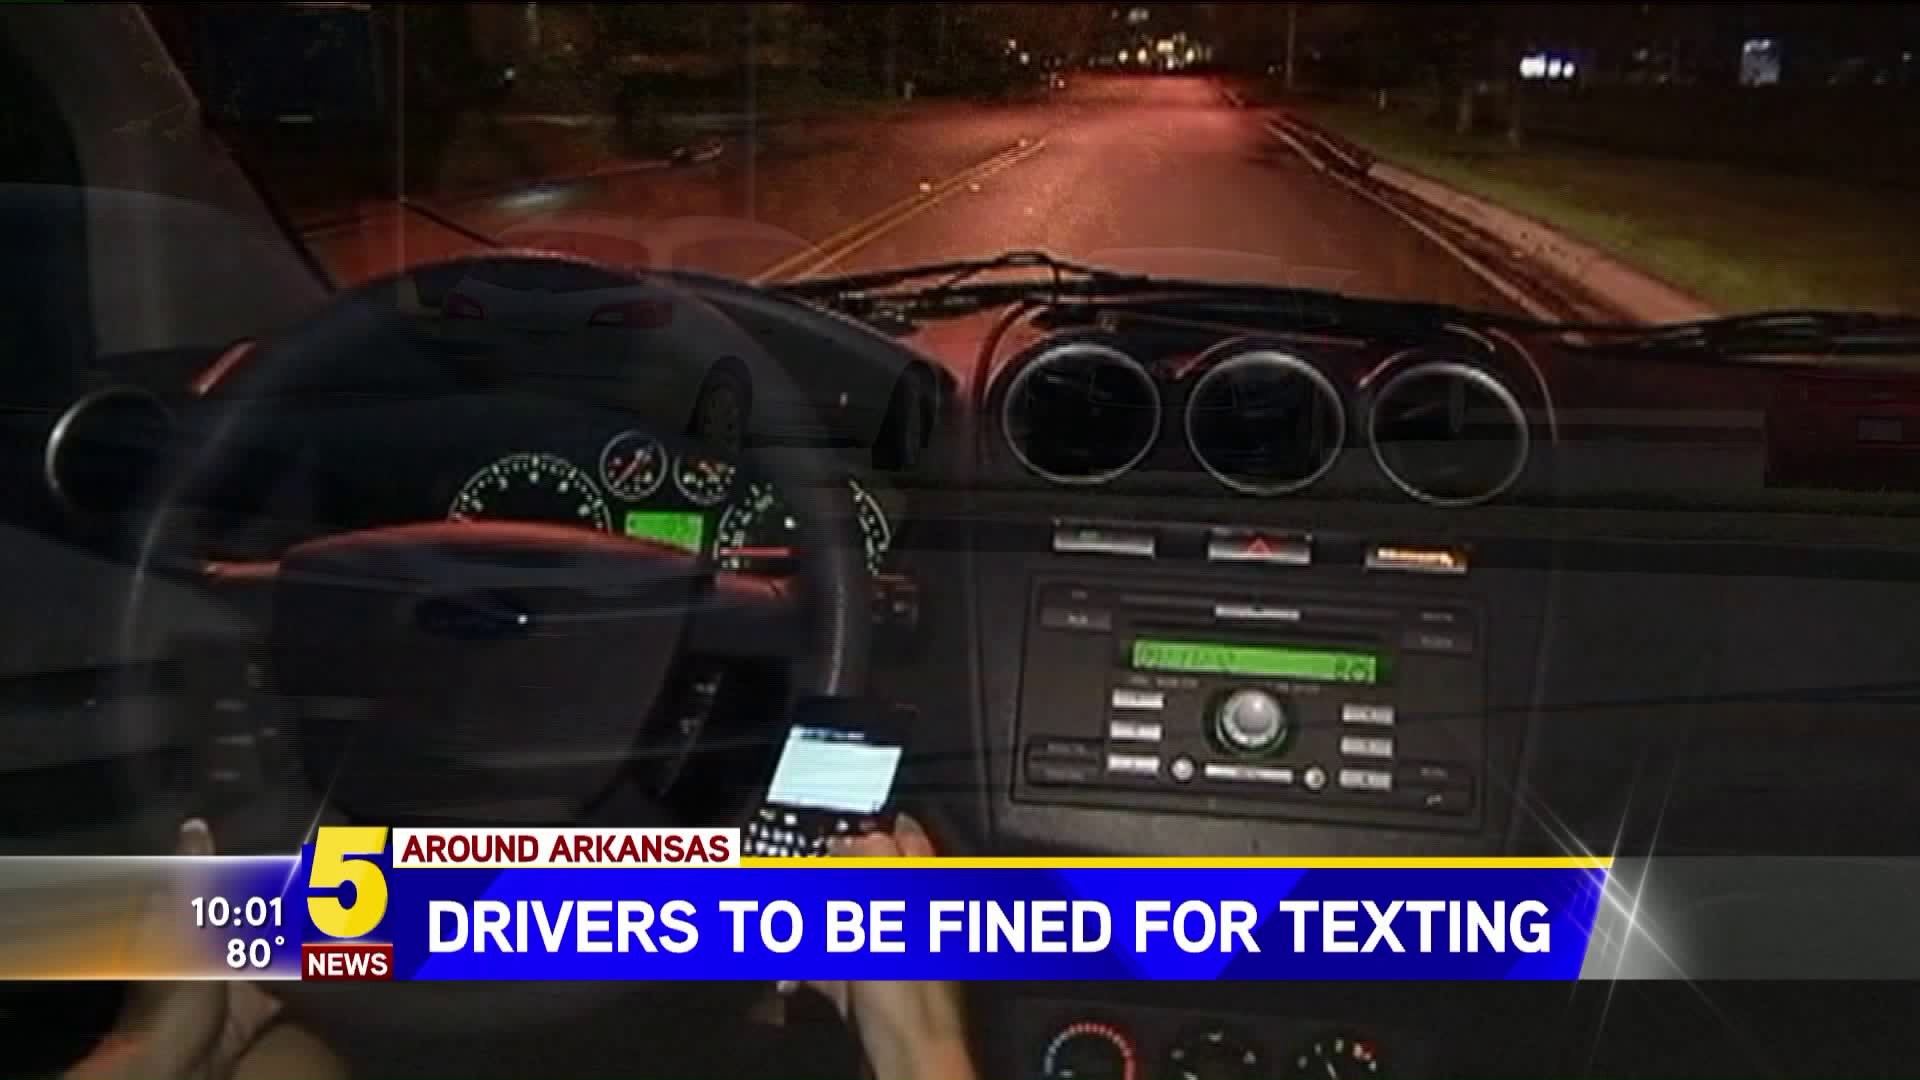 Arkansas Drivers To Be Fined For Texting